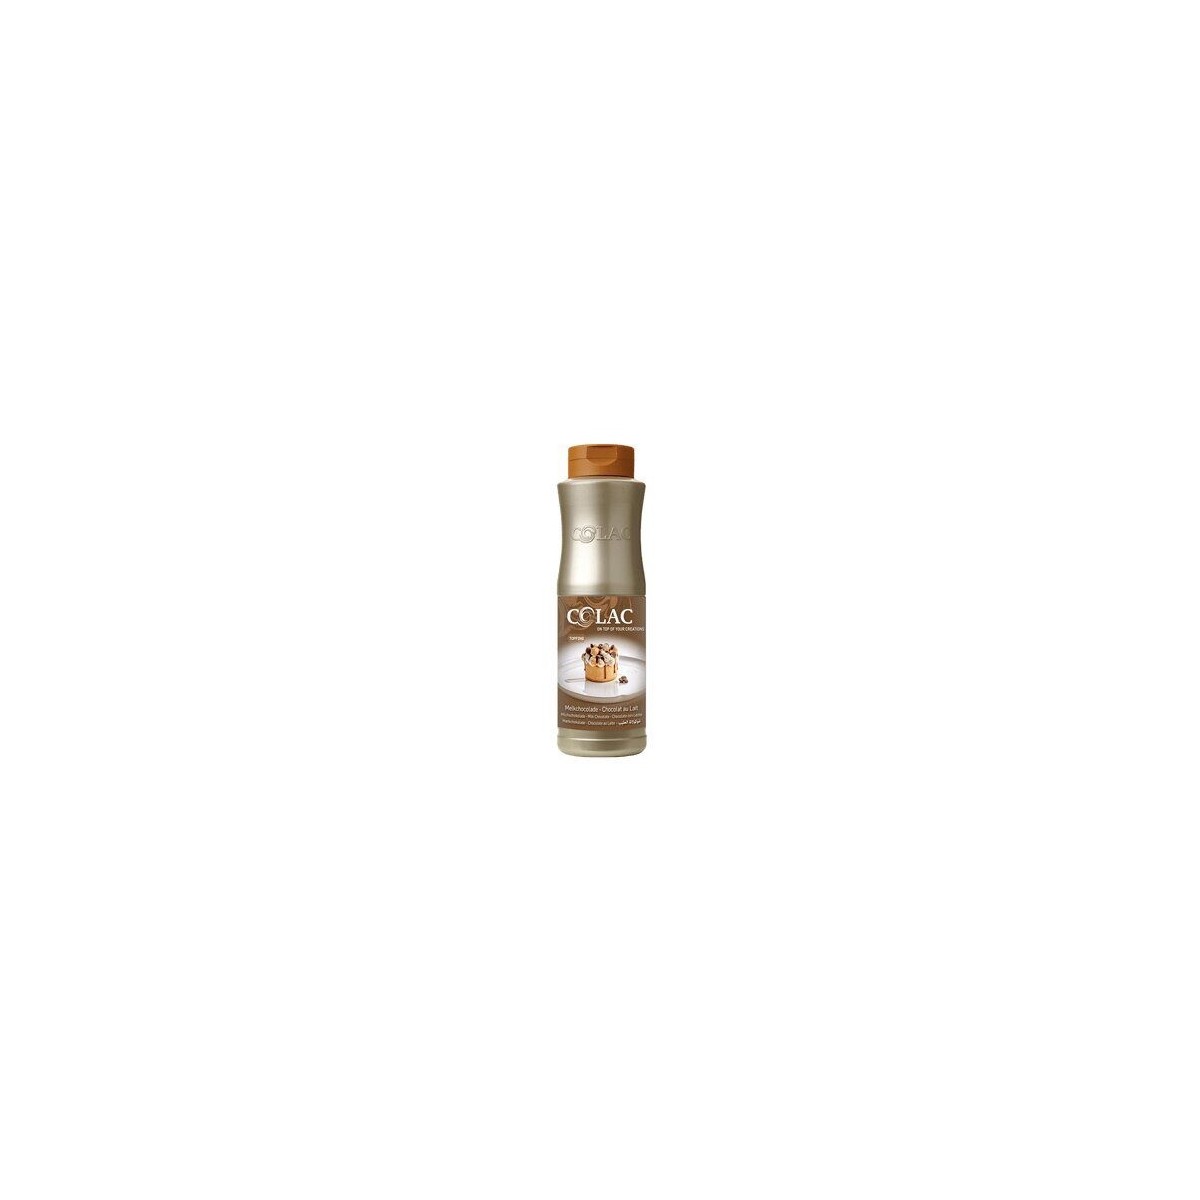 COLAC MILK CHOCOLATE TOPPING 1KG  BOTTLE